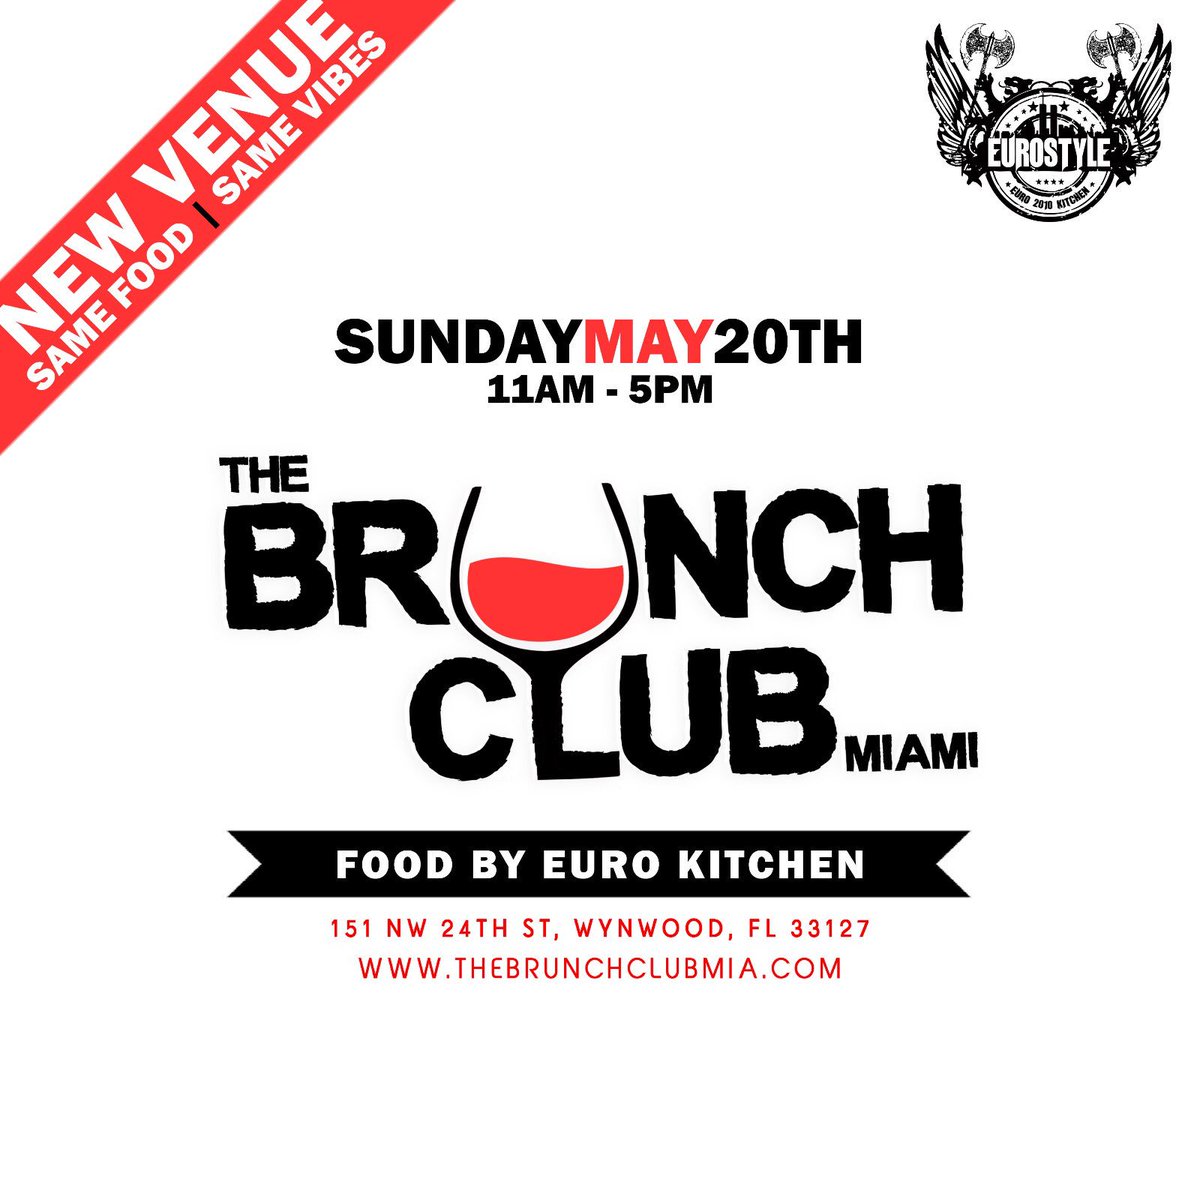 This Sunday - May 20th 11am 🆕 
Brand New Venue & the same Great Food by the best #EuroKitchen • RSVP now @ thebrunchclubmia.com

#Brunch #Miami #Wynwood #Island360 #JoinTheClub #BlinkDaLink #AltiDaGawd #MiamiBrunch #WynwoodBrunch #Foodie #TheBrunchClubMia